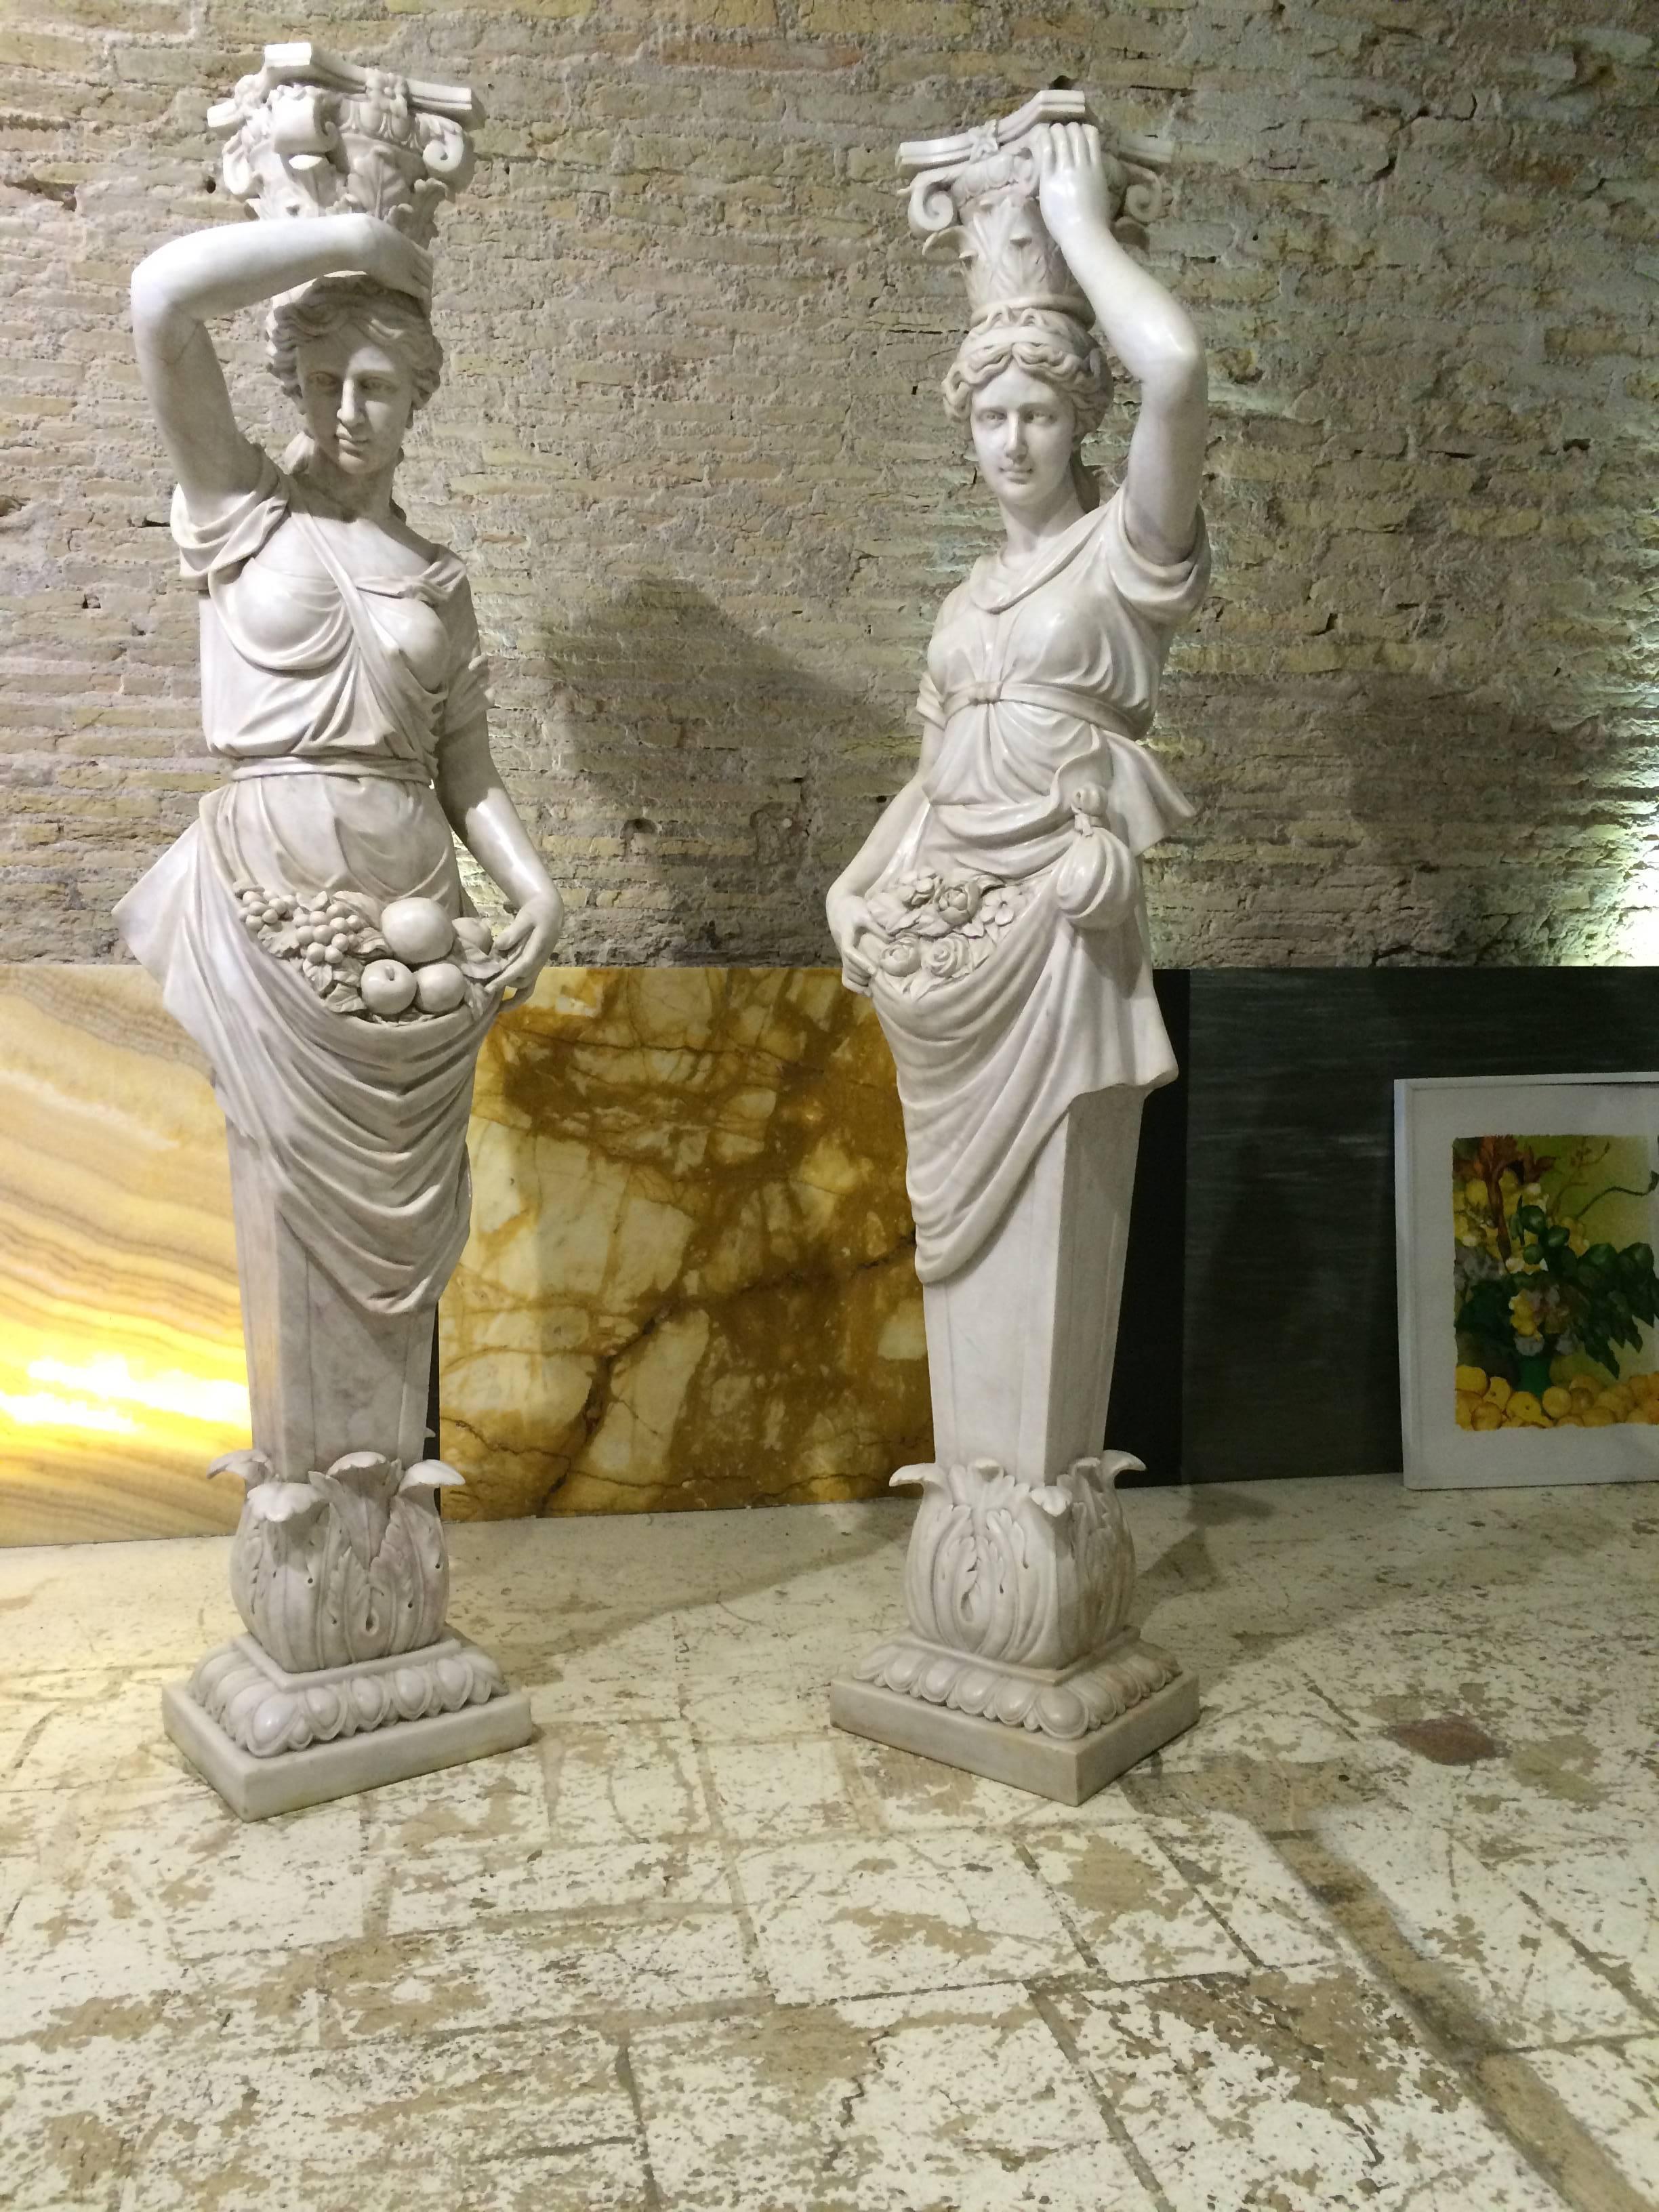 the practice of painting and fitting marble sculpture with bronze accessories